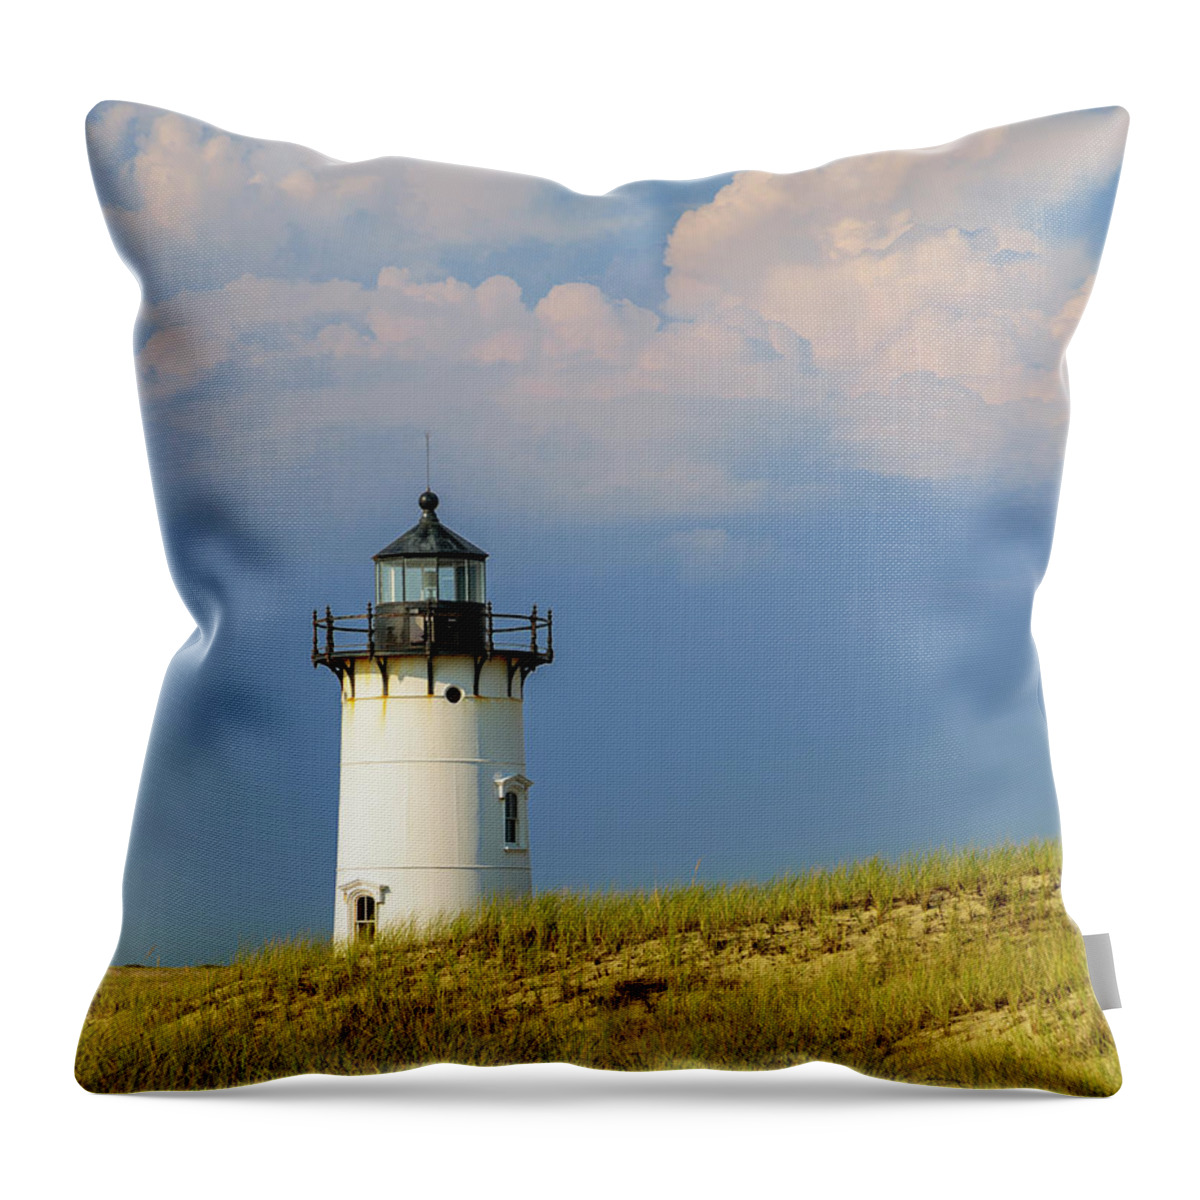 Lighthouse Throw Pillow featuring the photograph Sunlit Lighthouse by David Lee